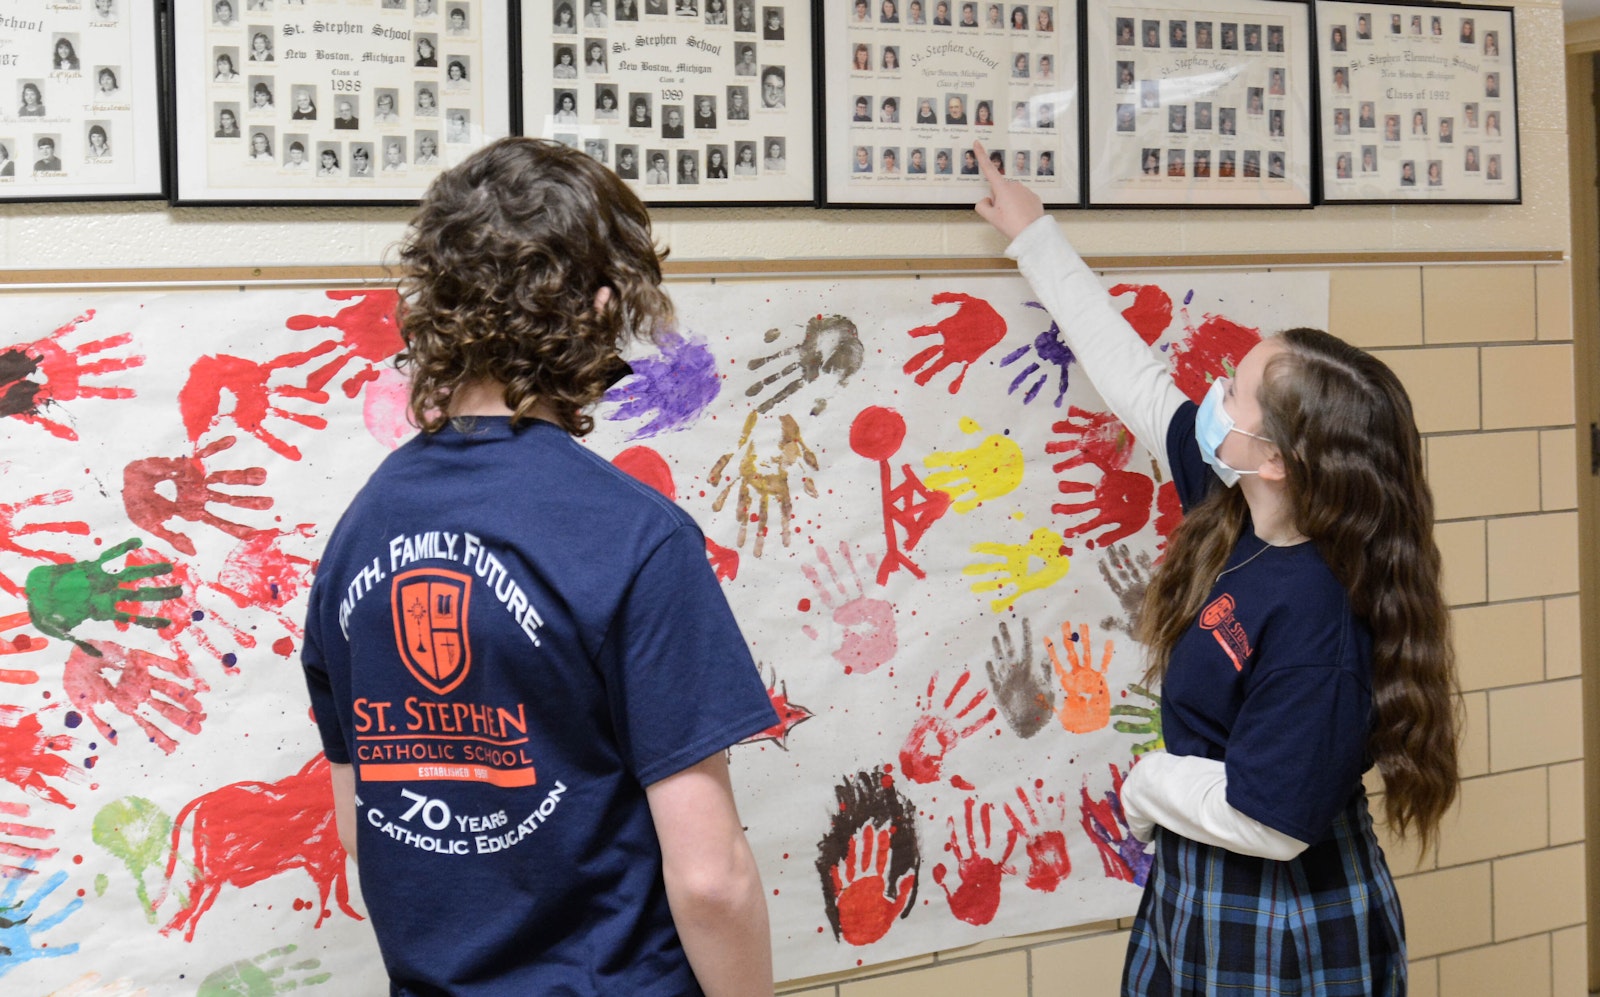 Students point to former St. Stephen School classes as they paint a banner with handprints in the school's hallway.